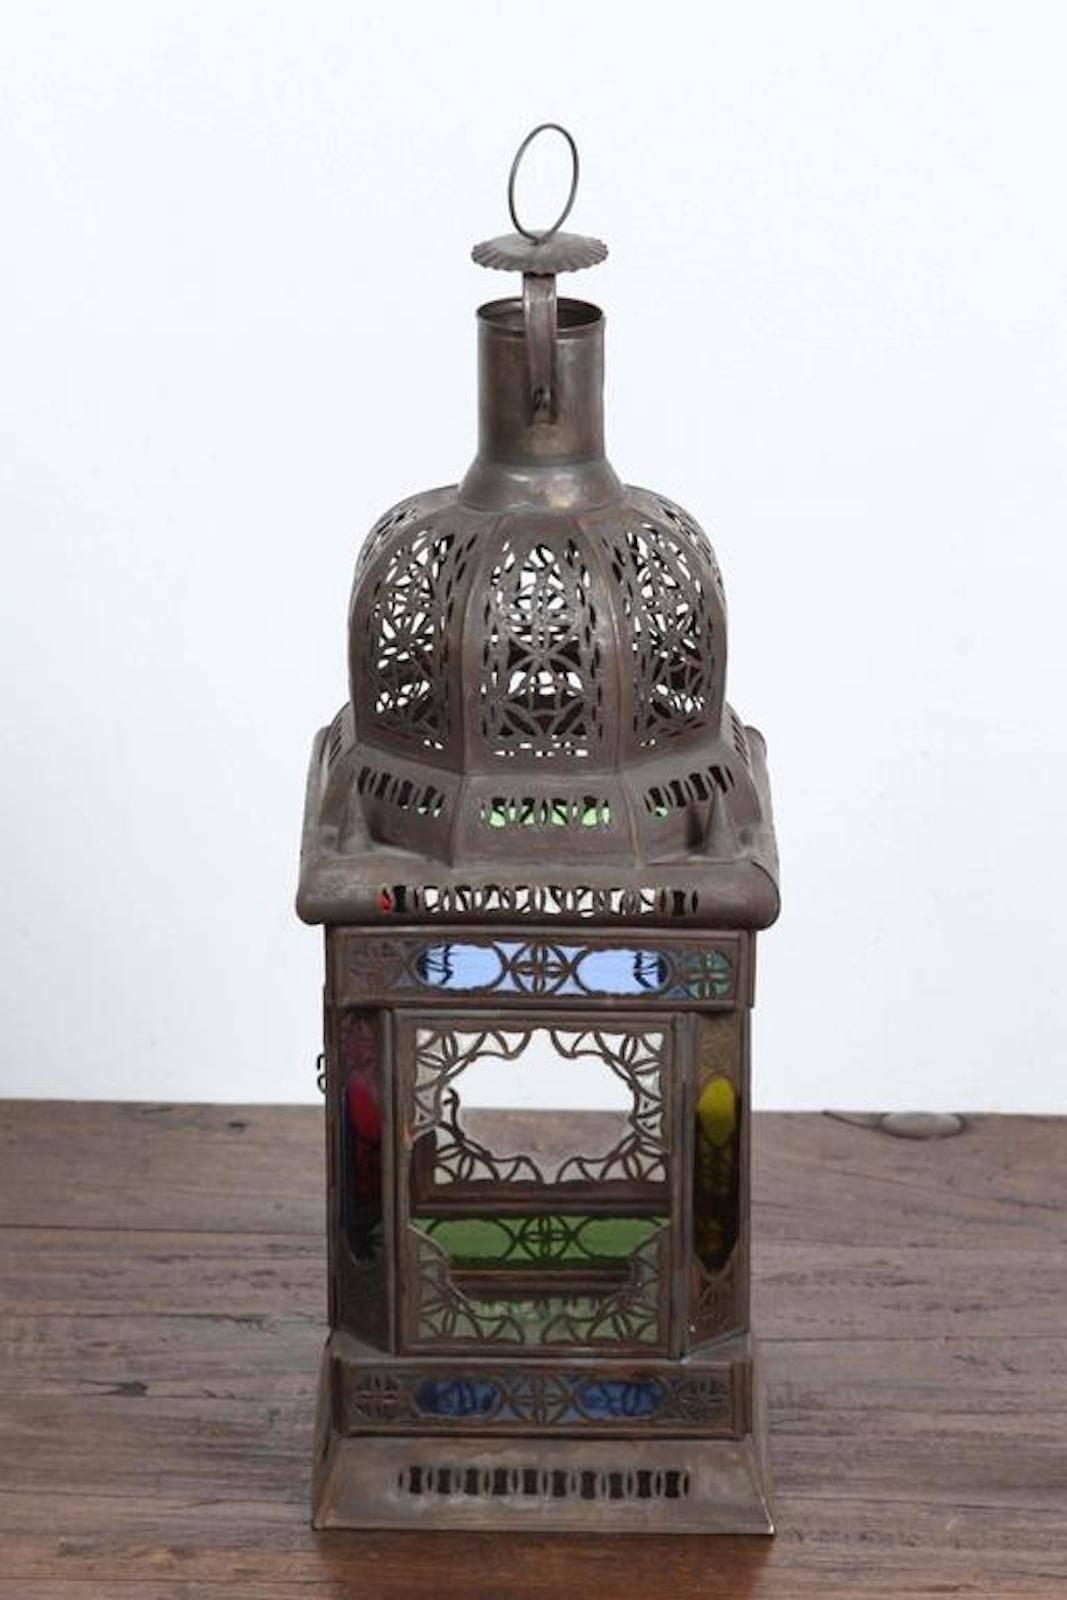 Moroccan Moorish square metal and glass candle lantern or pendant.
Square shape with clear and colored glass in red, green, blue and amber color.
Vintage bronze rust finish metal hurricane candle lamp.
There is a glass bottom and a small door to